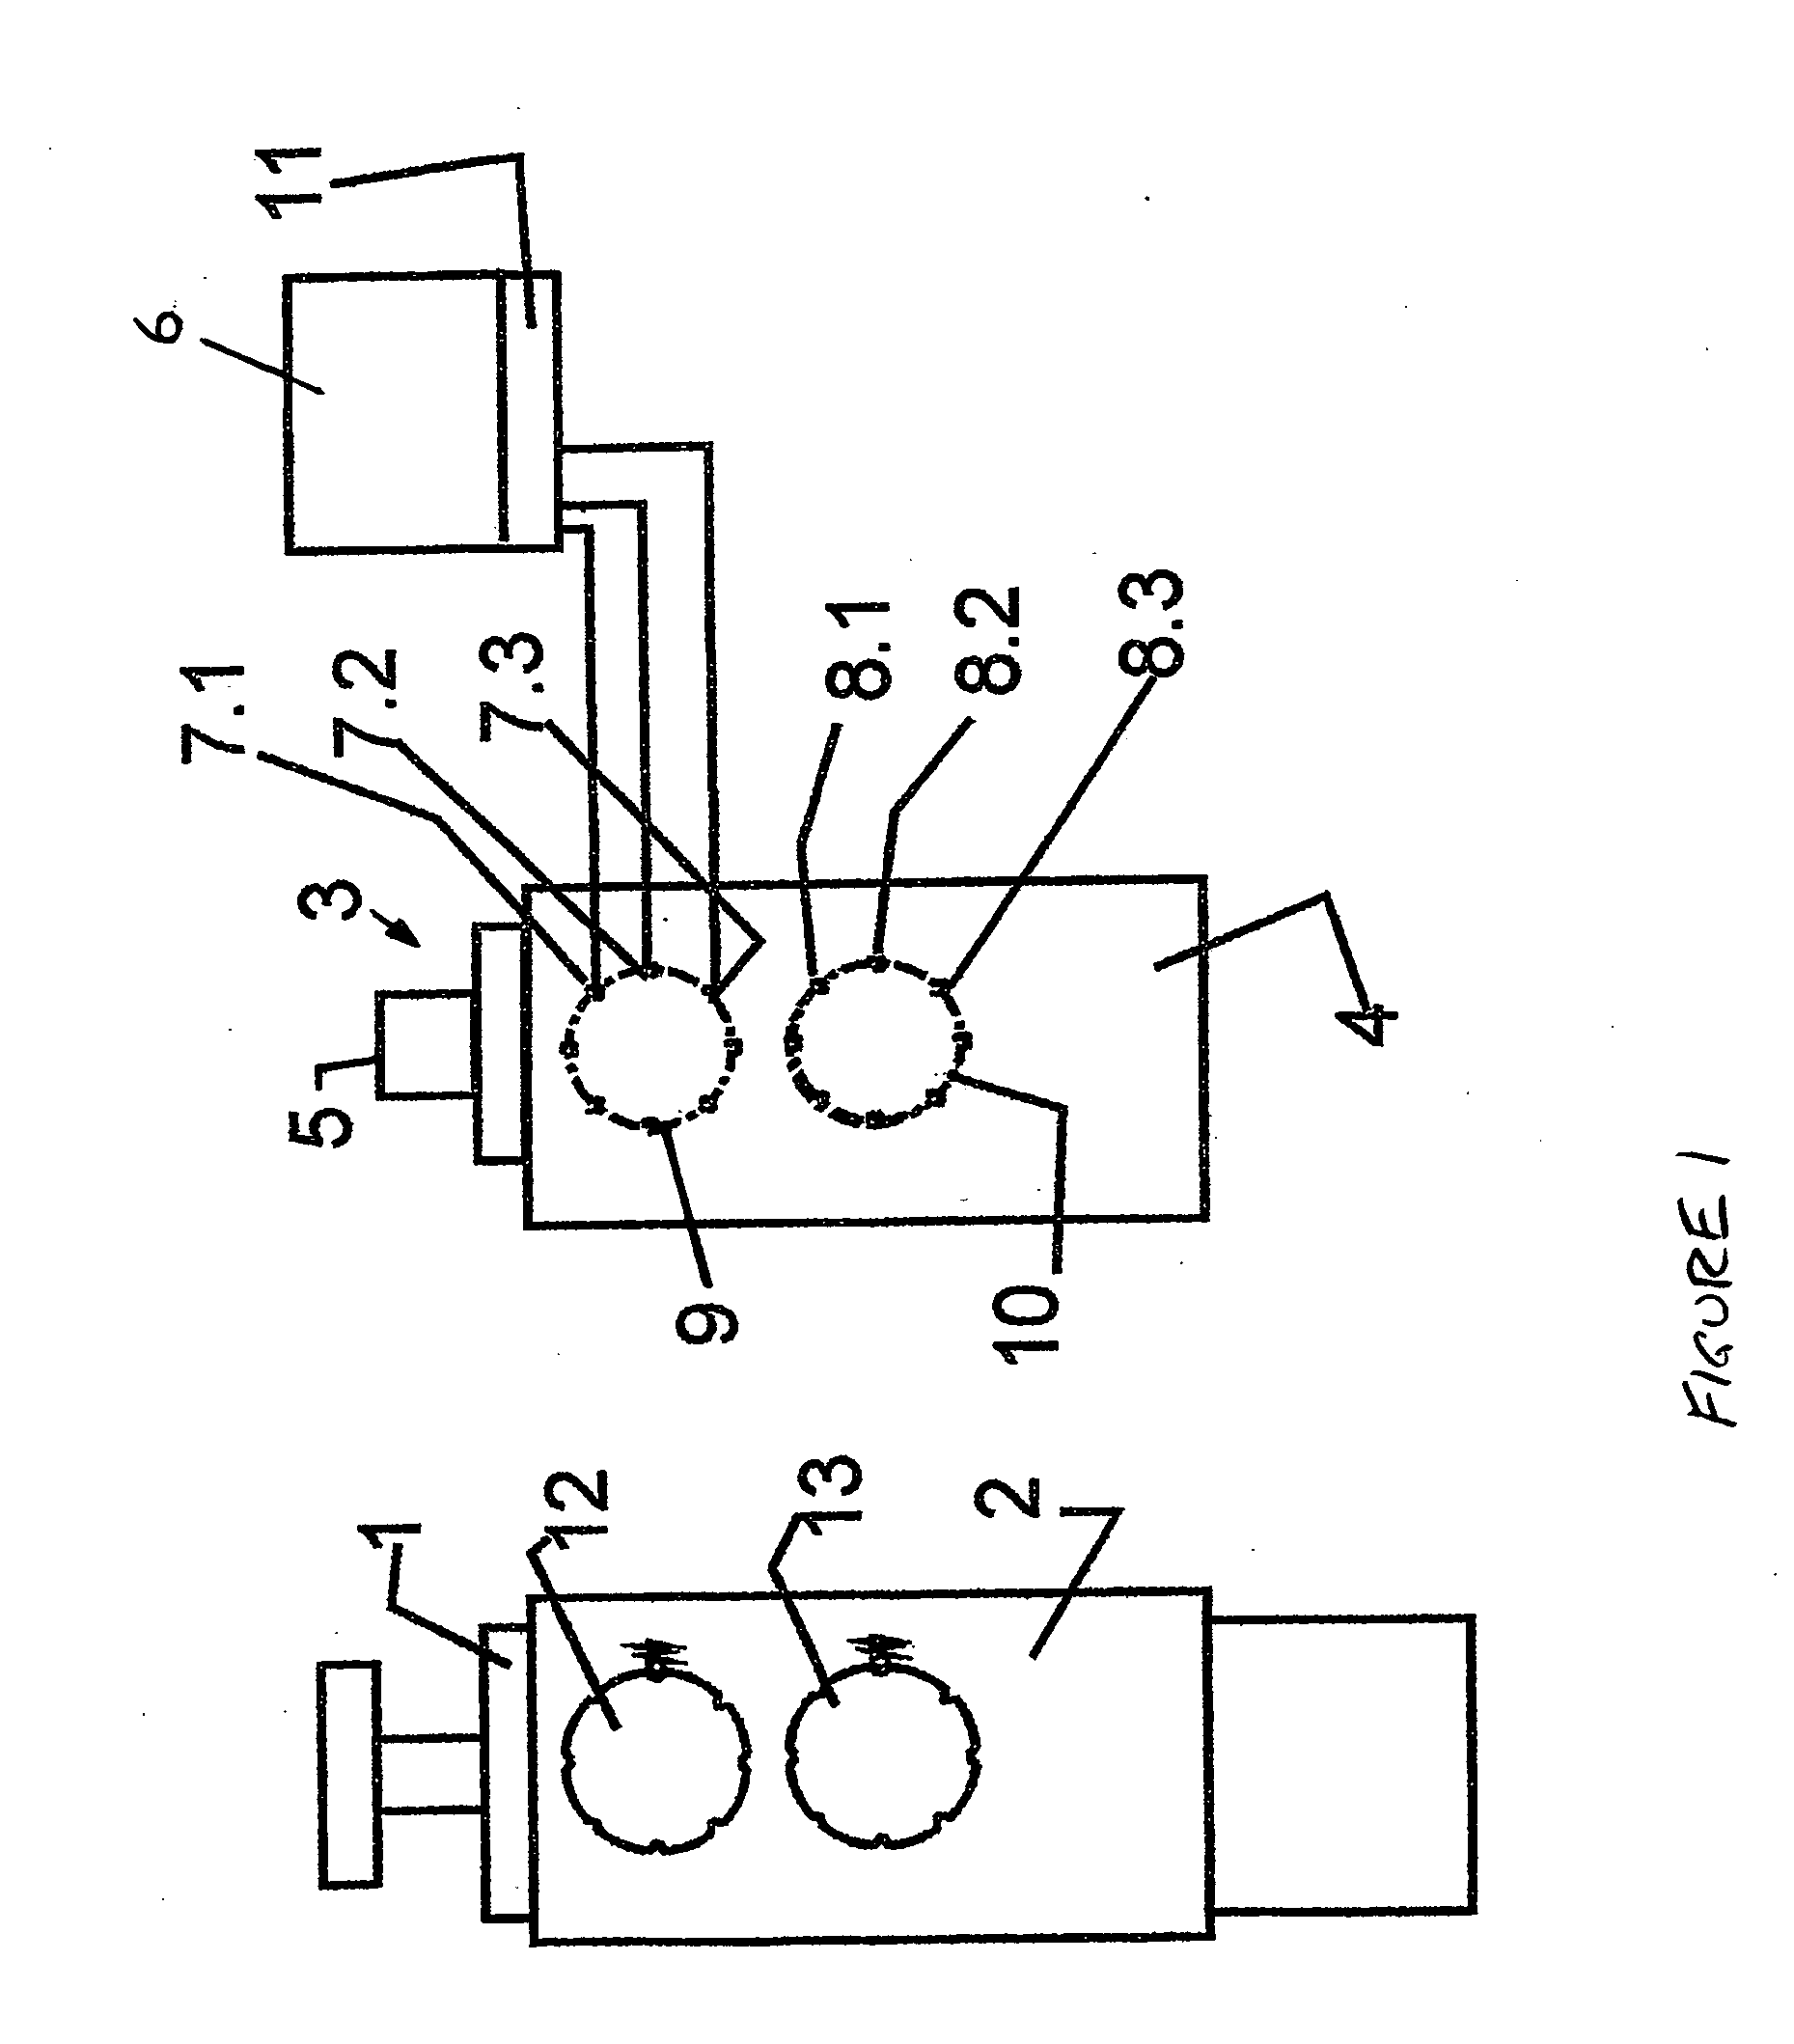 Electrically controlled actuating element on a machine